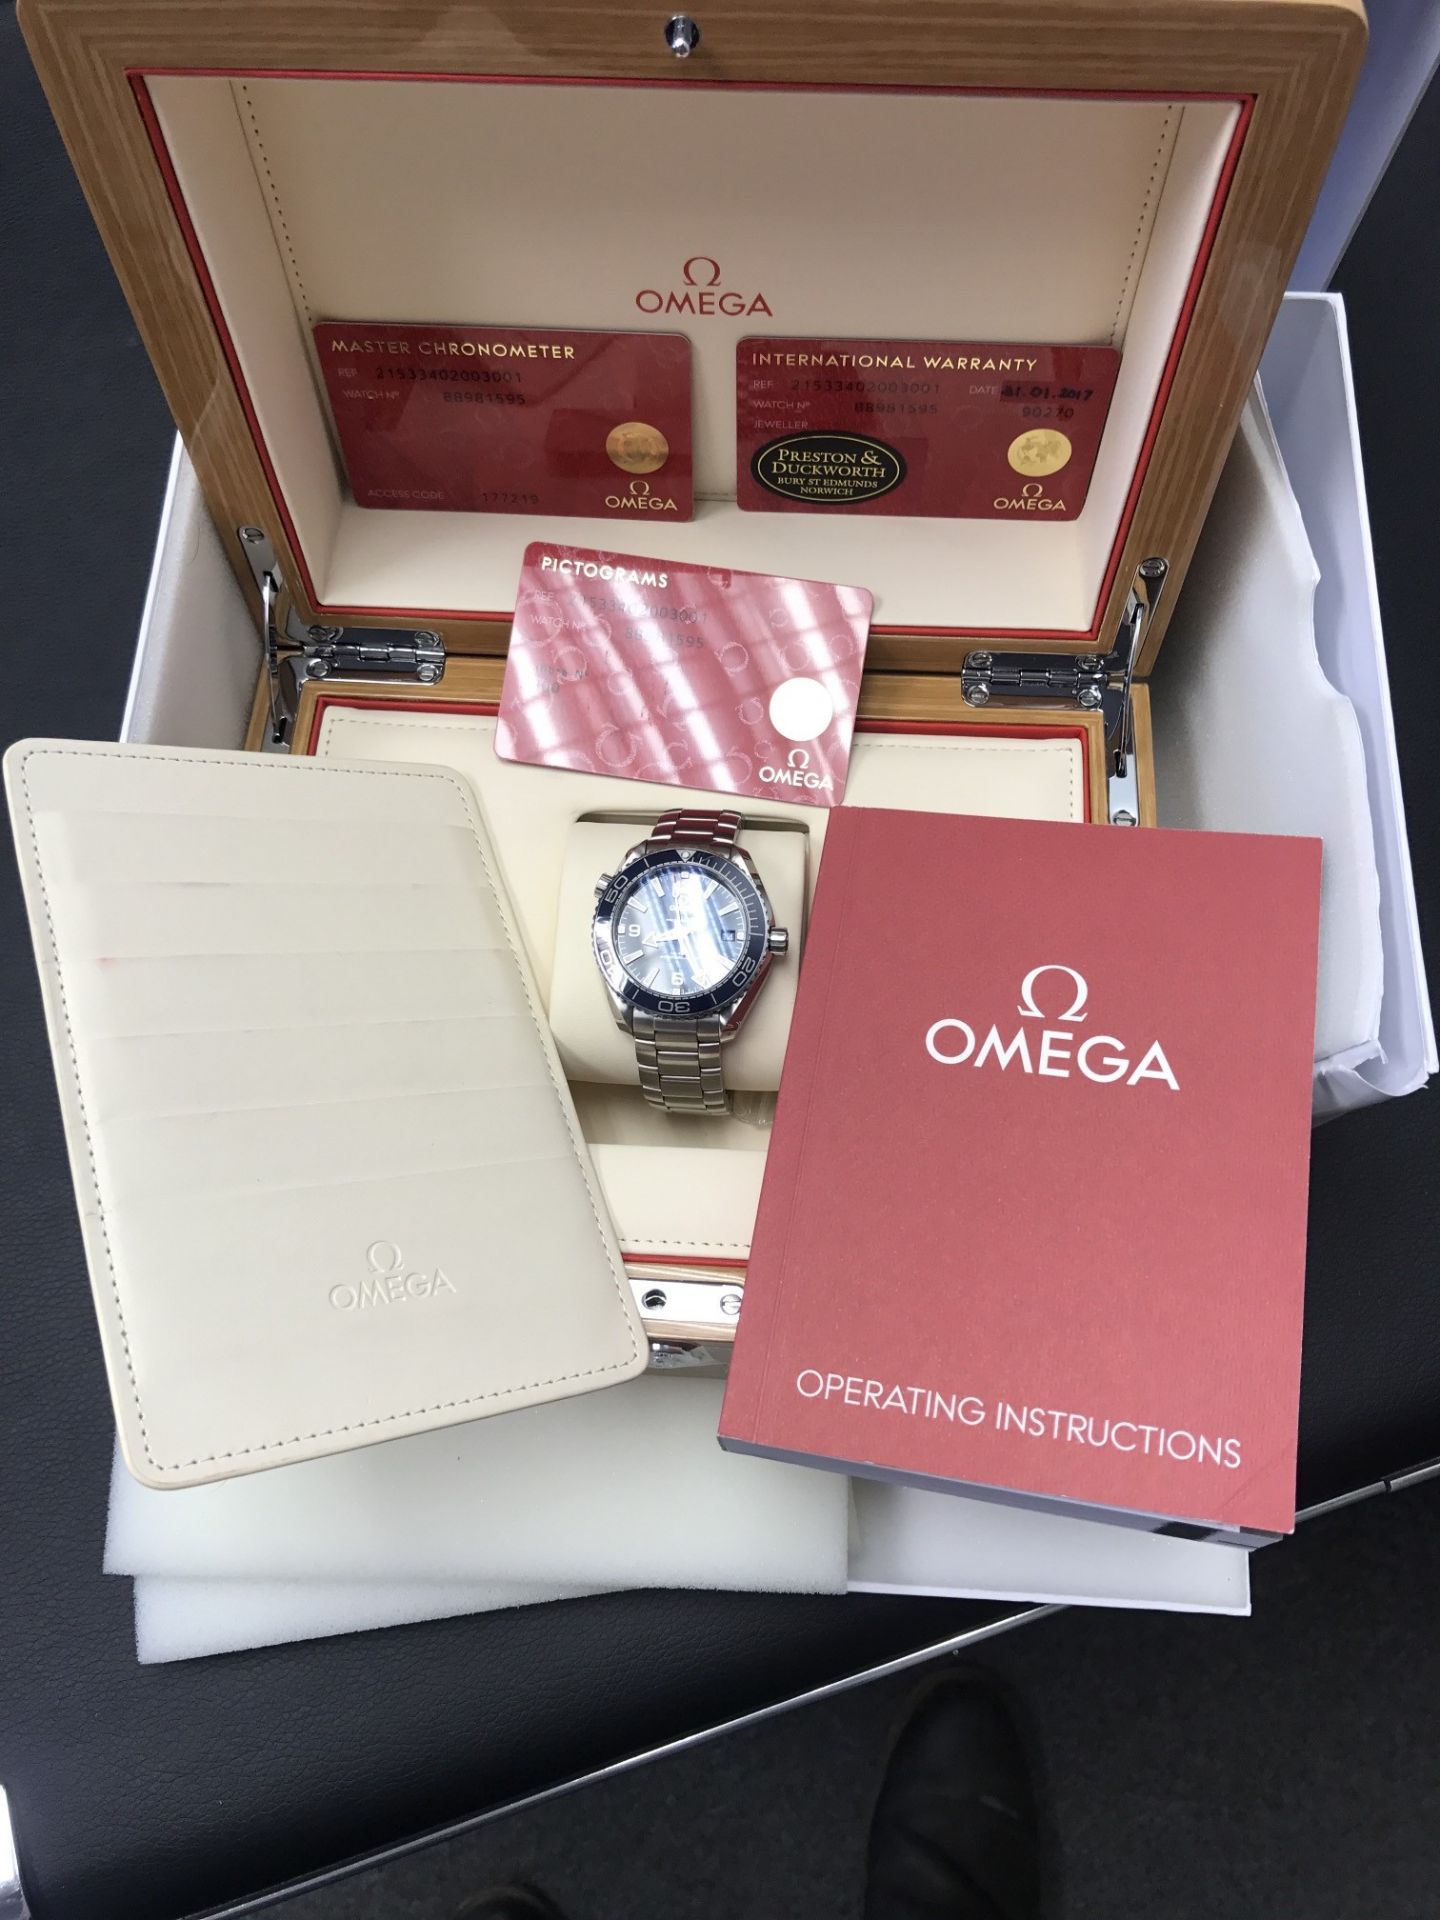 GENTS OMEGA PLANET OCEAN WATCH BOXED WITH PAPERS - Image 4 of 7